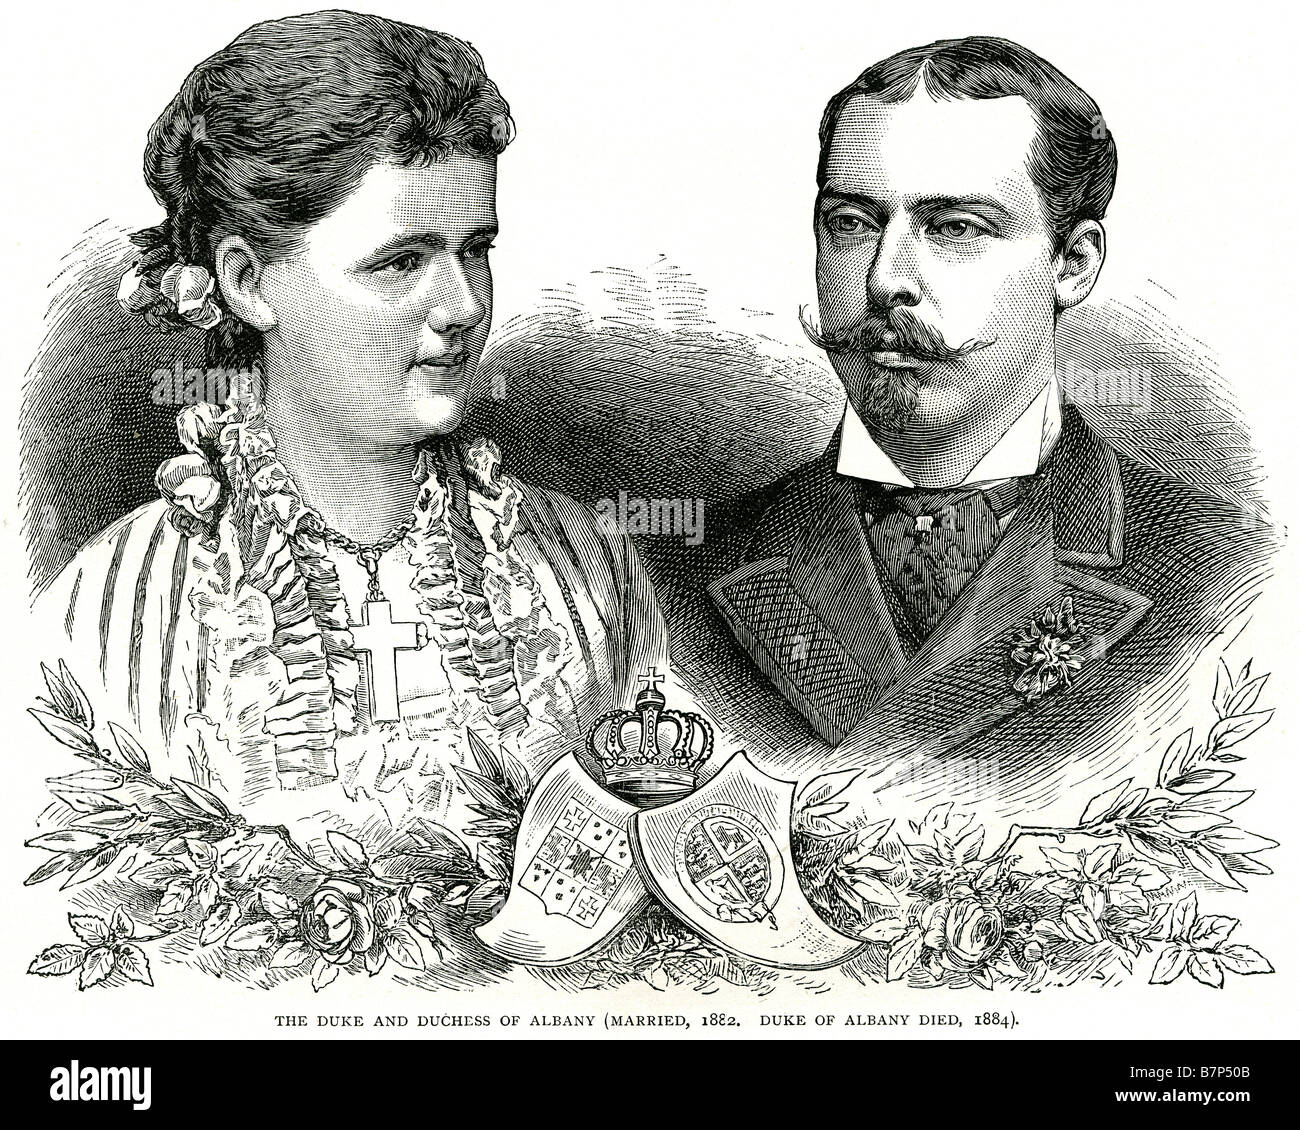 duke duchess albany married 1882 duke albany died 1884 coat arms shield crown cross man woman traditional clothing Stock Photo